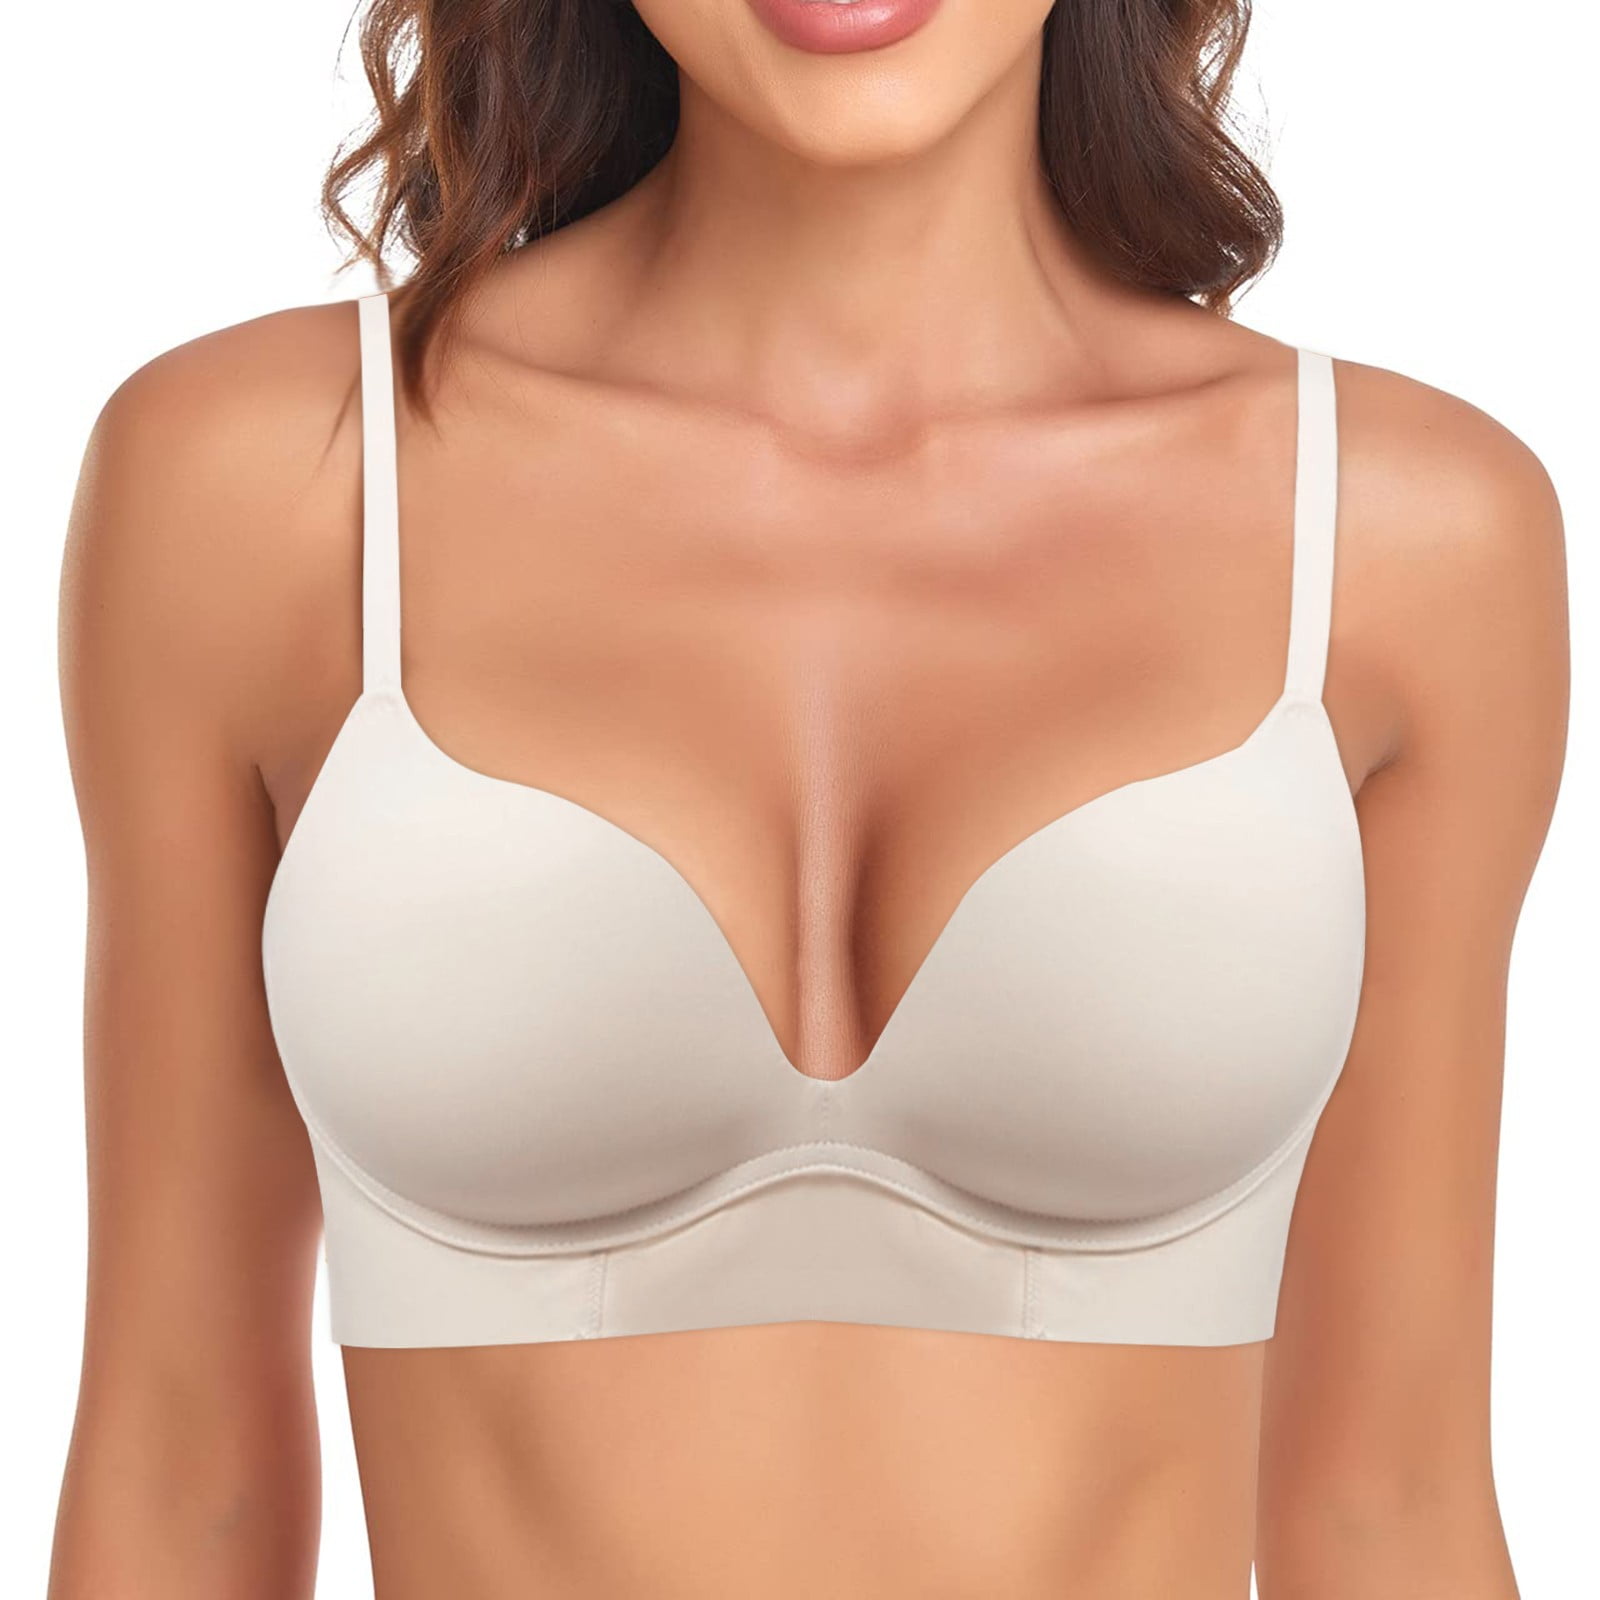 Bras for Women No Underwire Front Closure Comfort Push Up T Shirt